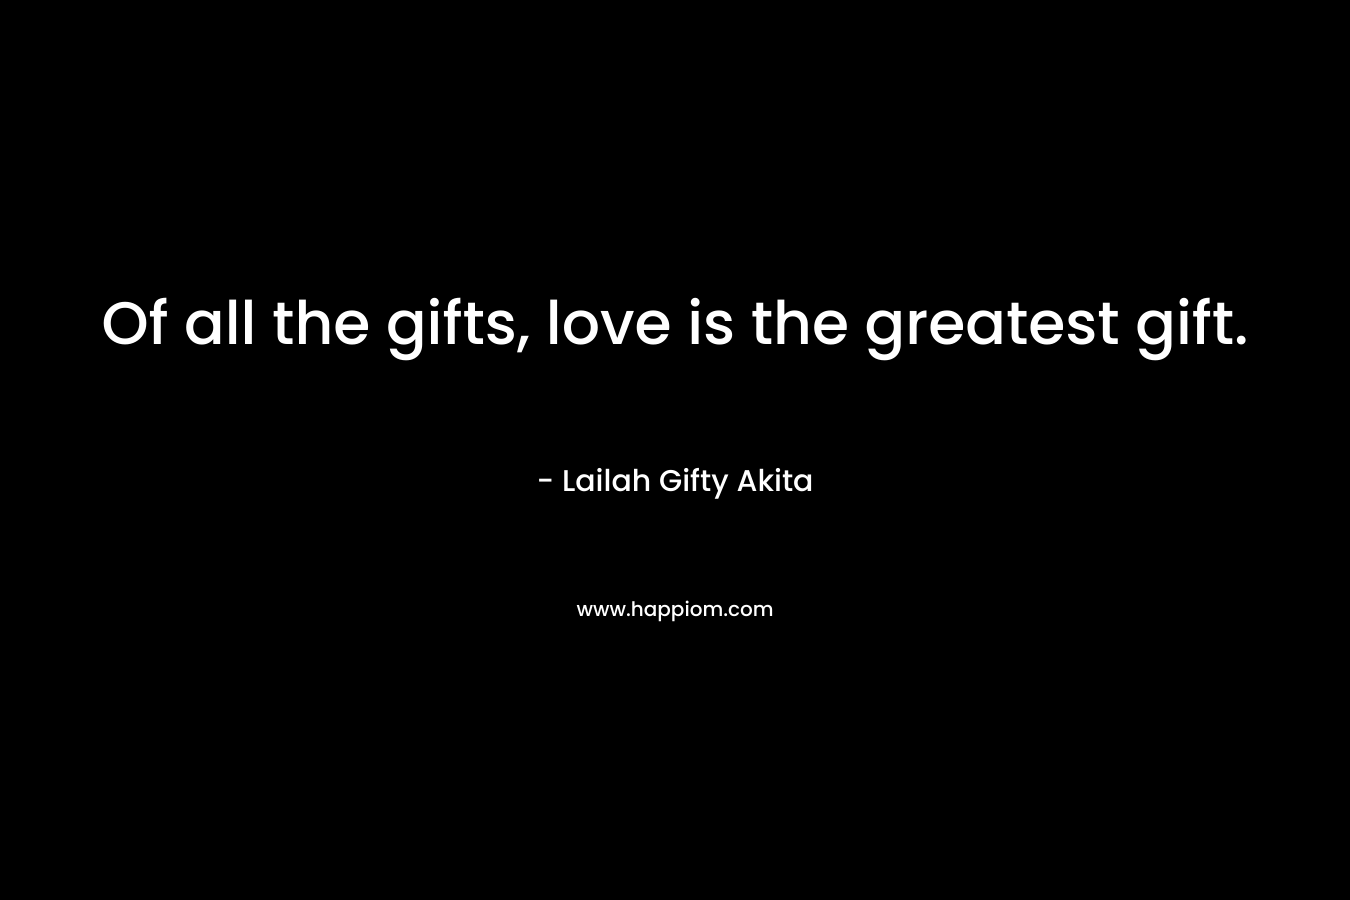 Of all the gifts, love is the greatest gift.